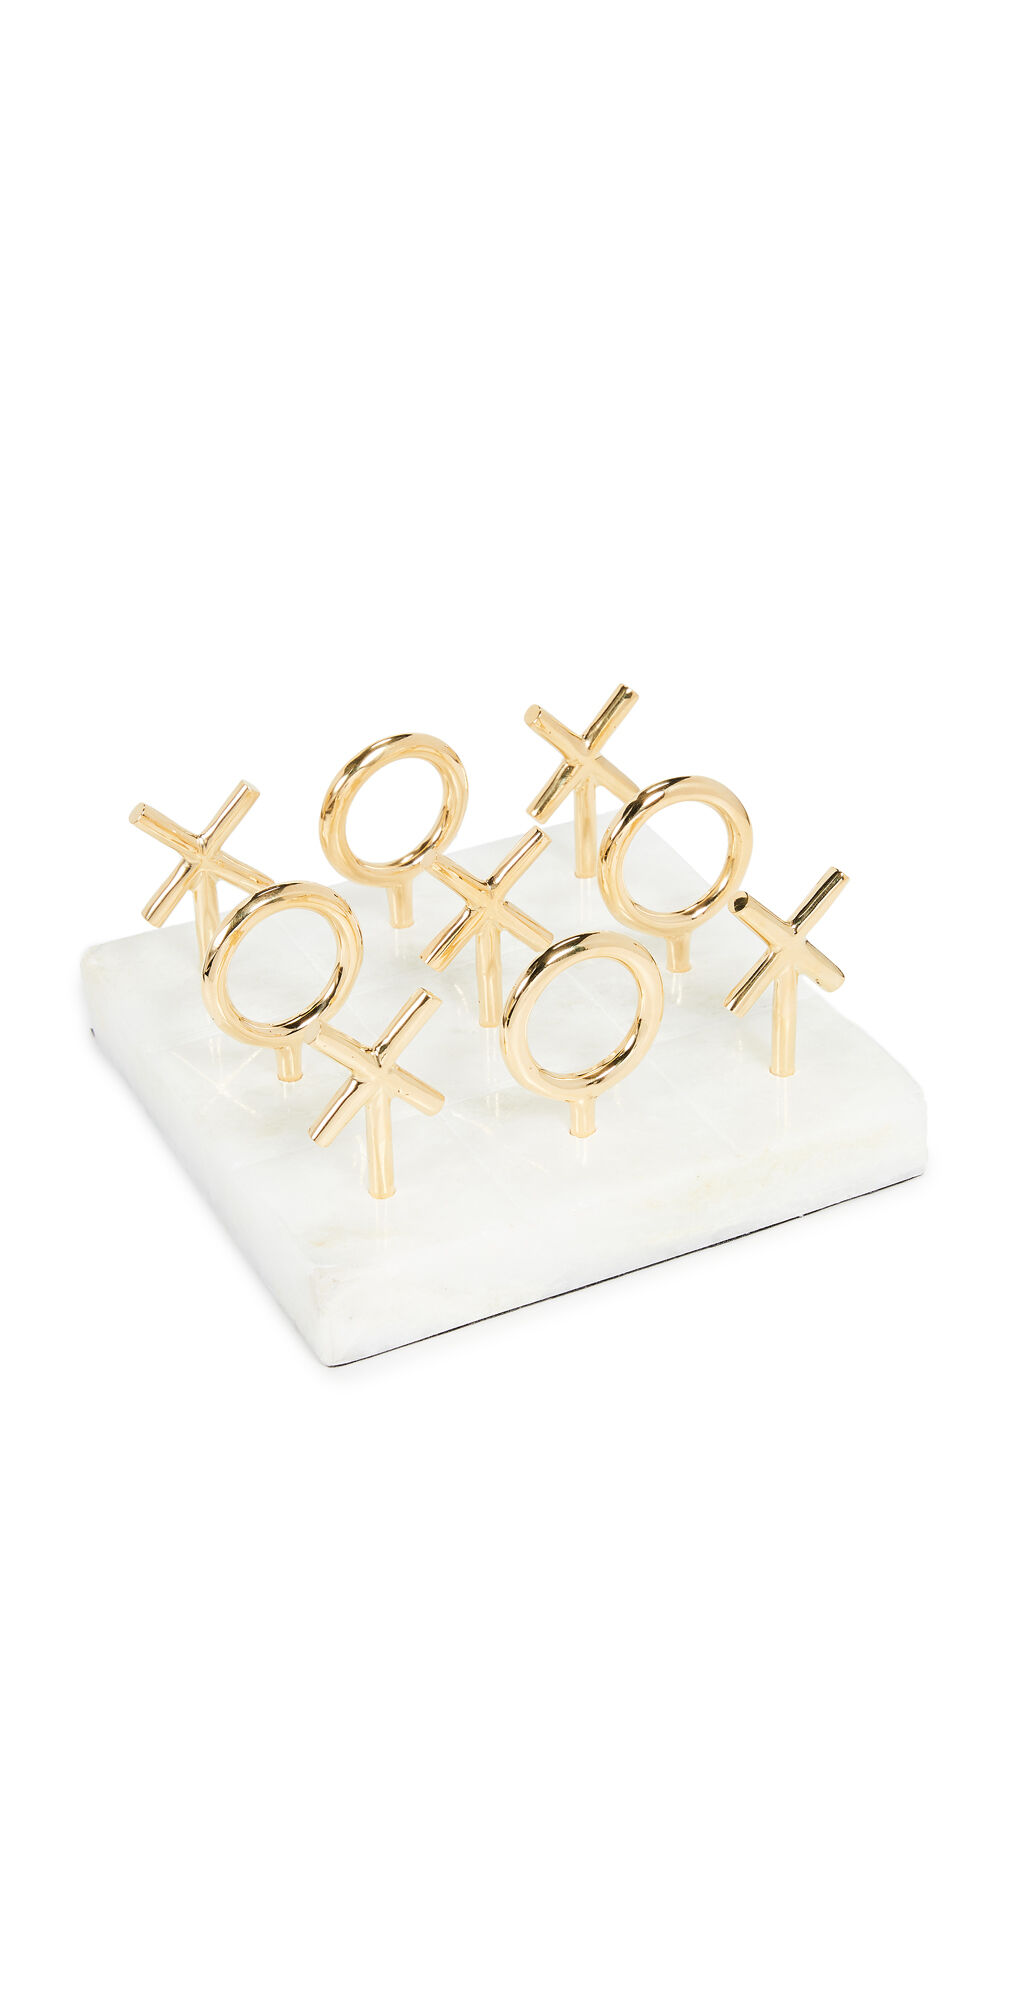 Jonathan Adler Brass Tic Tac Toe Game Brass One Size  Brass  size:One Size